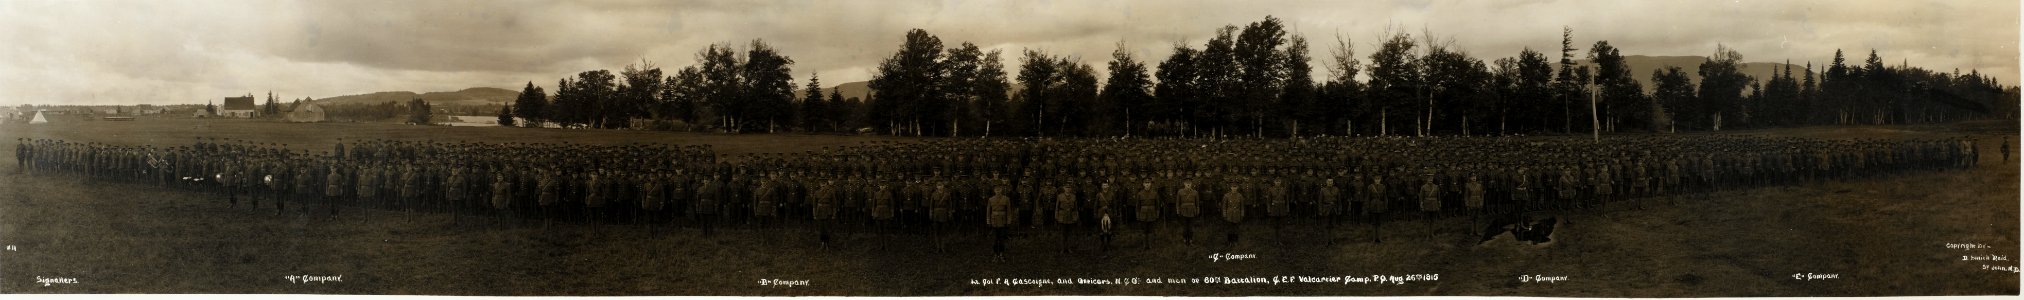 Lt.-Col. F.A. Gascoigne and officers, NCO's and men of 60th Battalion, CEF, Valcartier Camp, Aug. 26th, 1915. Signallers, companies 'A', 'B', 'C', 'D', 'E'. No. 11 (HS85-10-30759) photo